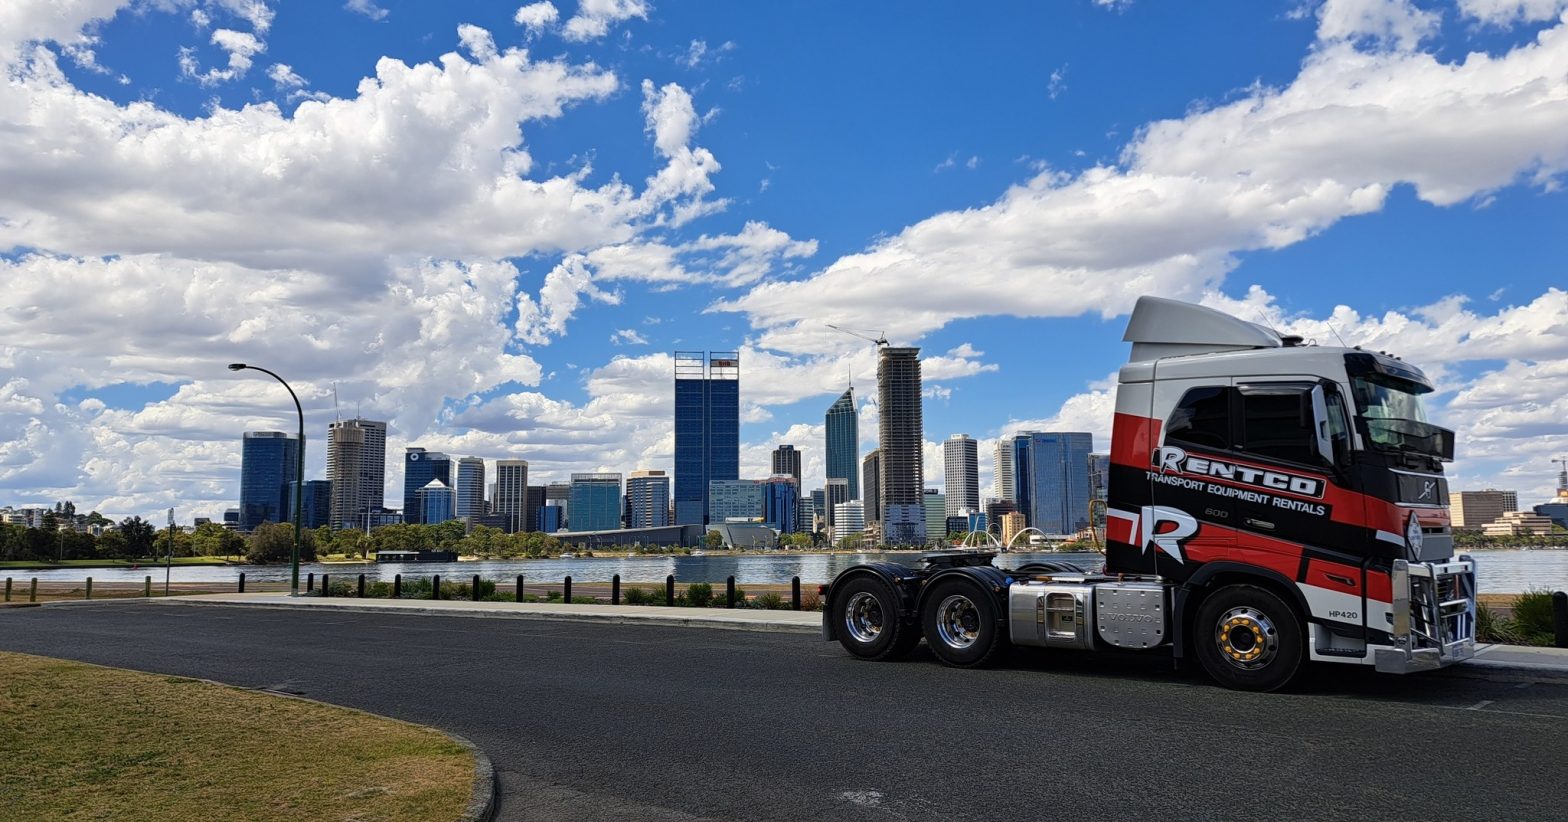 Rentco Truck driving on the road in Perth city.